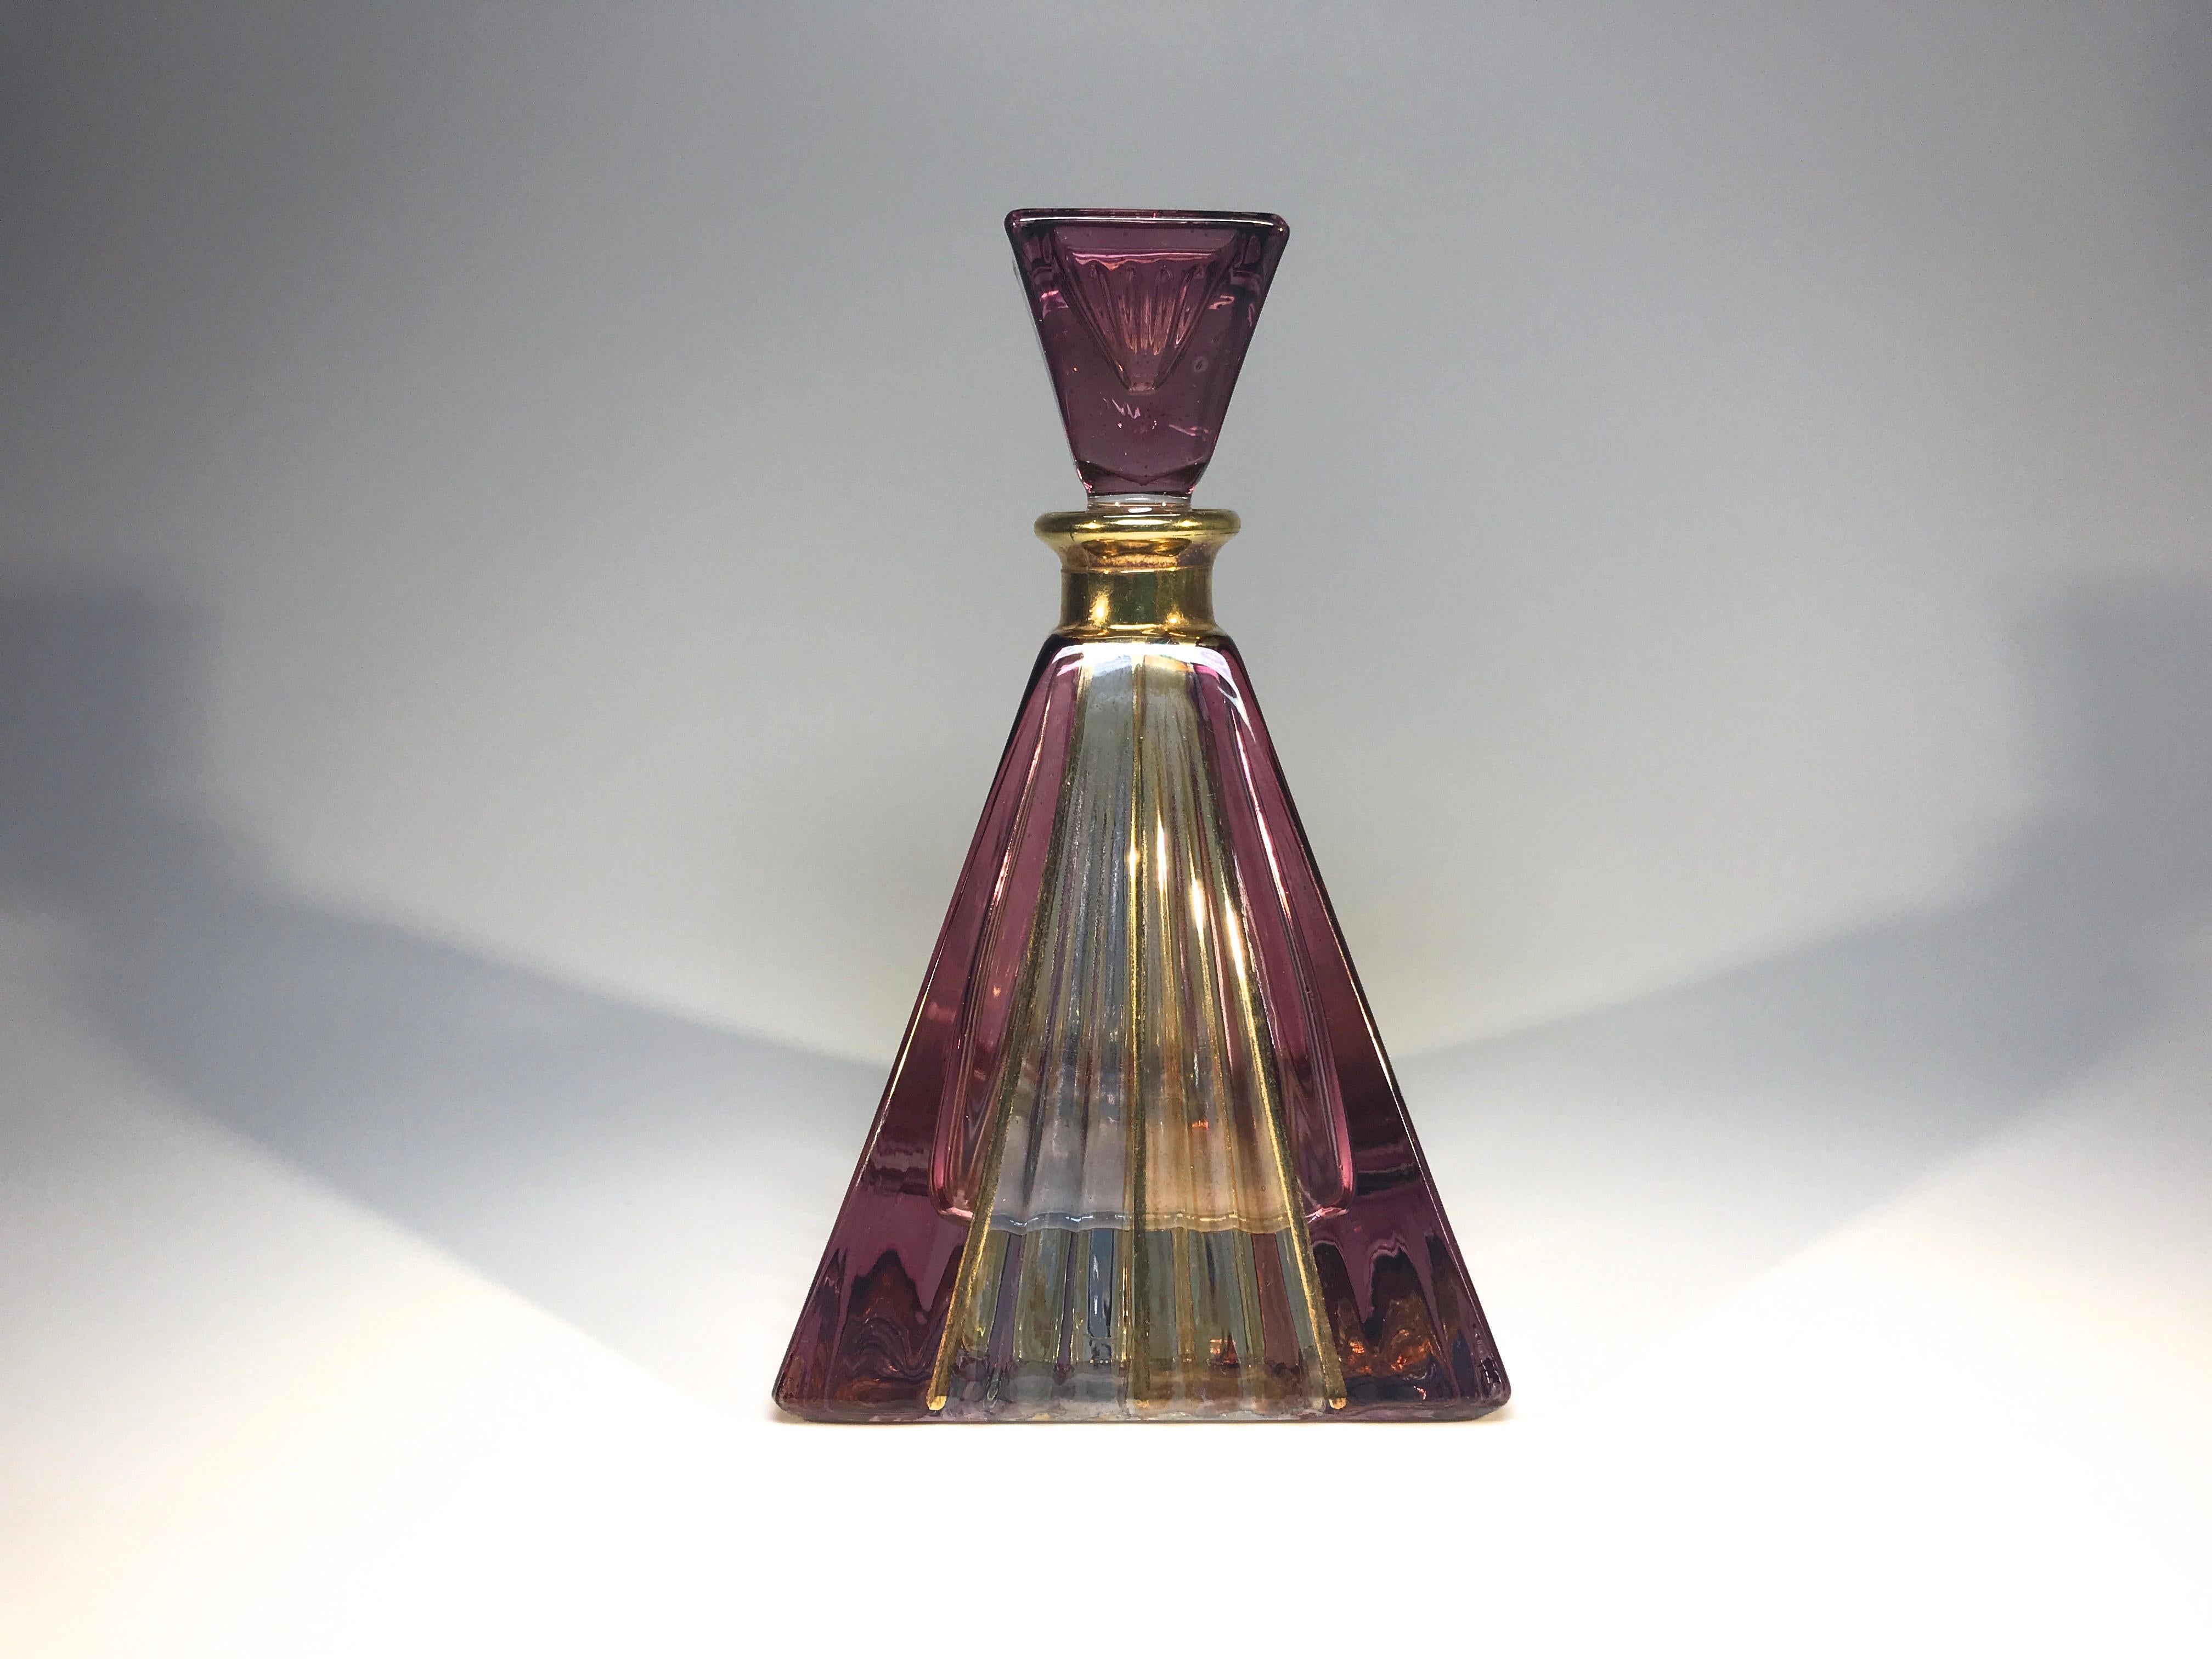 Vintage Murano of Italy, hand painted with 24-karat gold, amethyst and honey coloured glass pyramid perfume bottle
24-karat gold has been used to hand-paint the stripes over the coloured glass
Gold colored collar to bottle,
circa